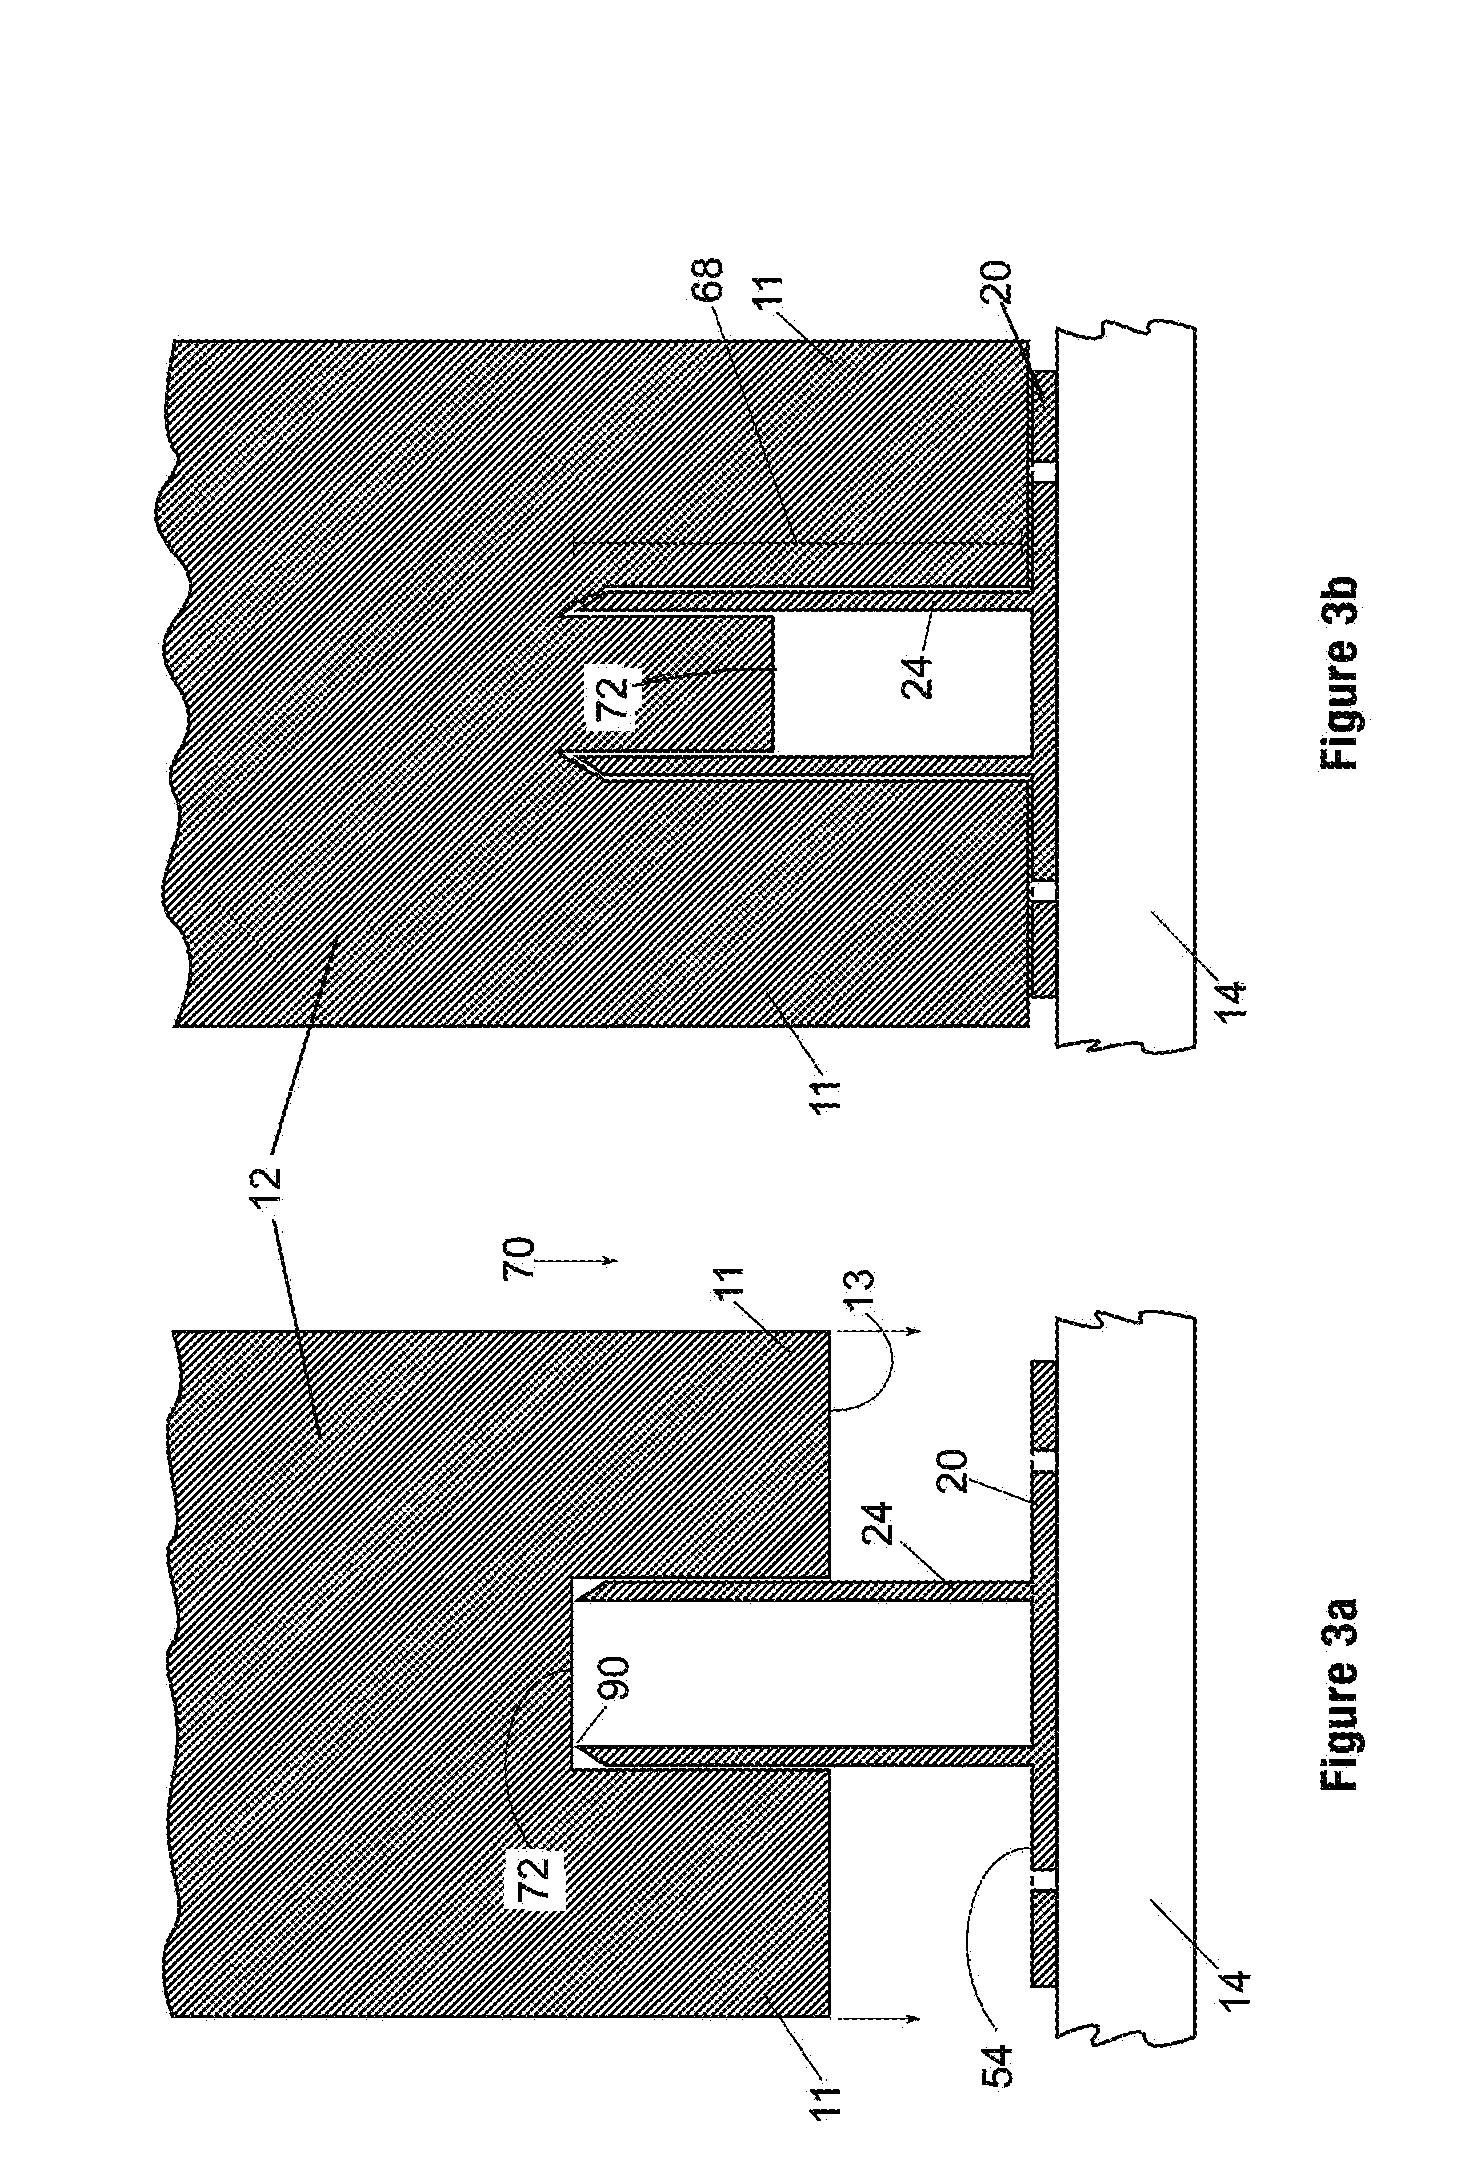 Post anchoring devices and methods